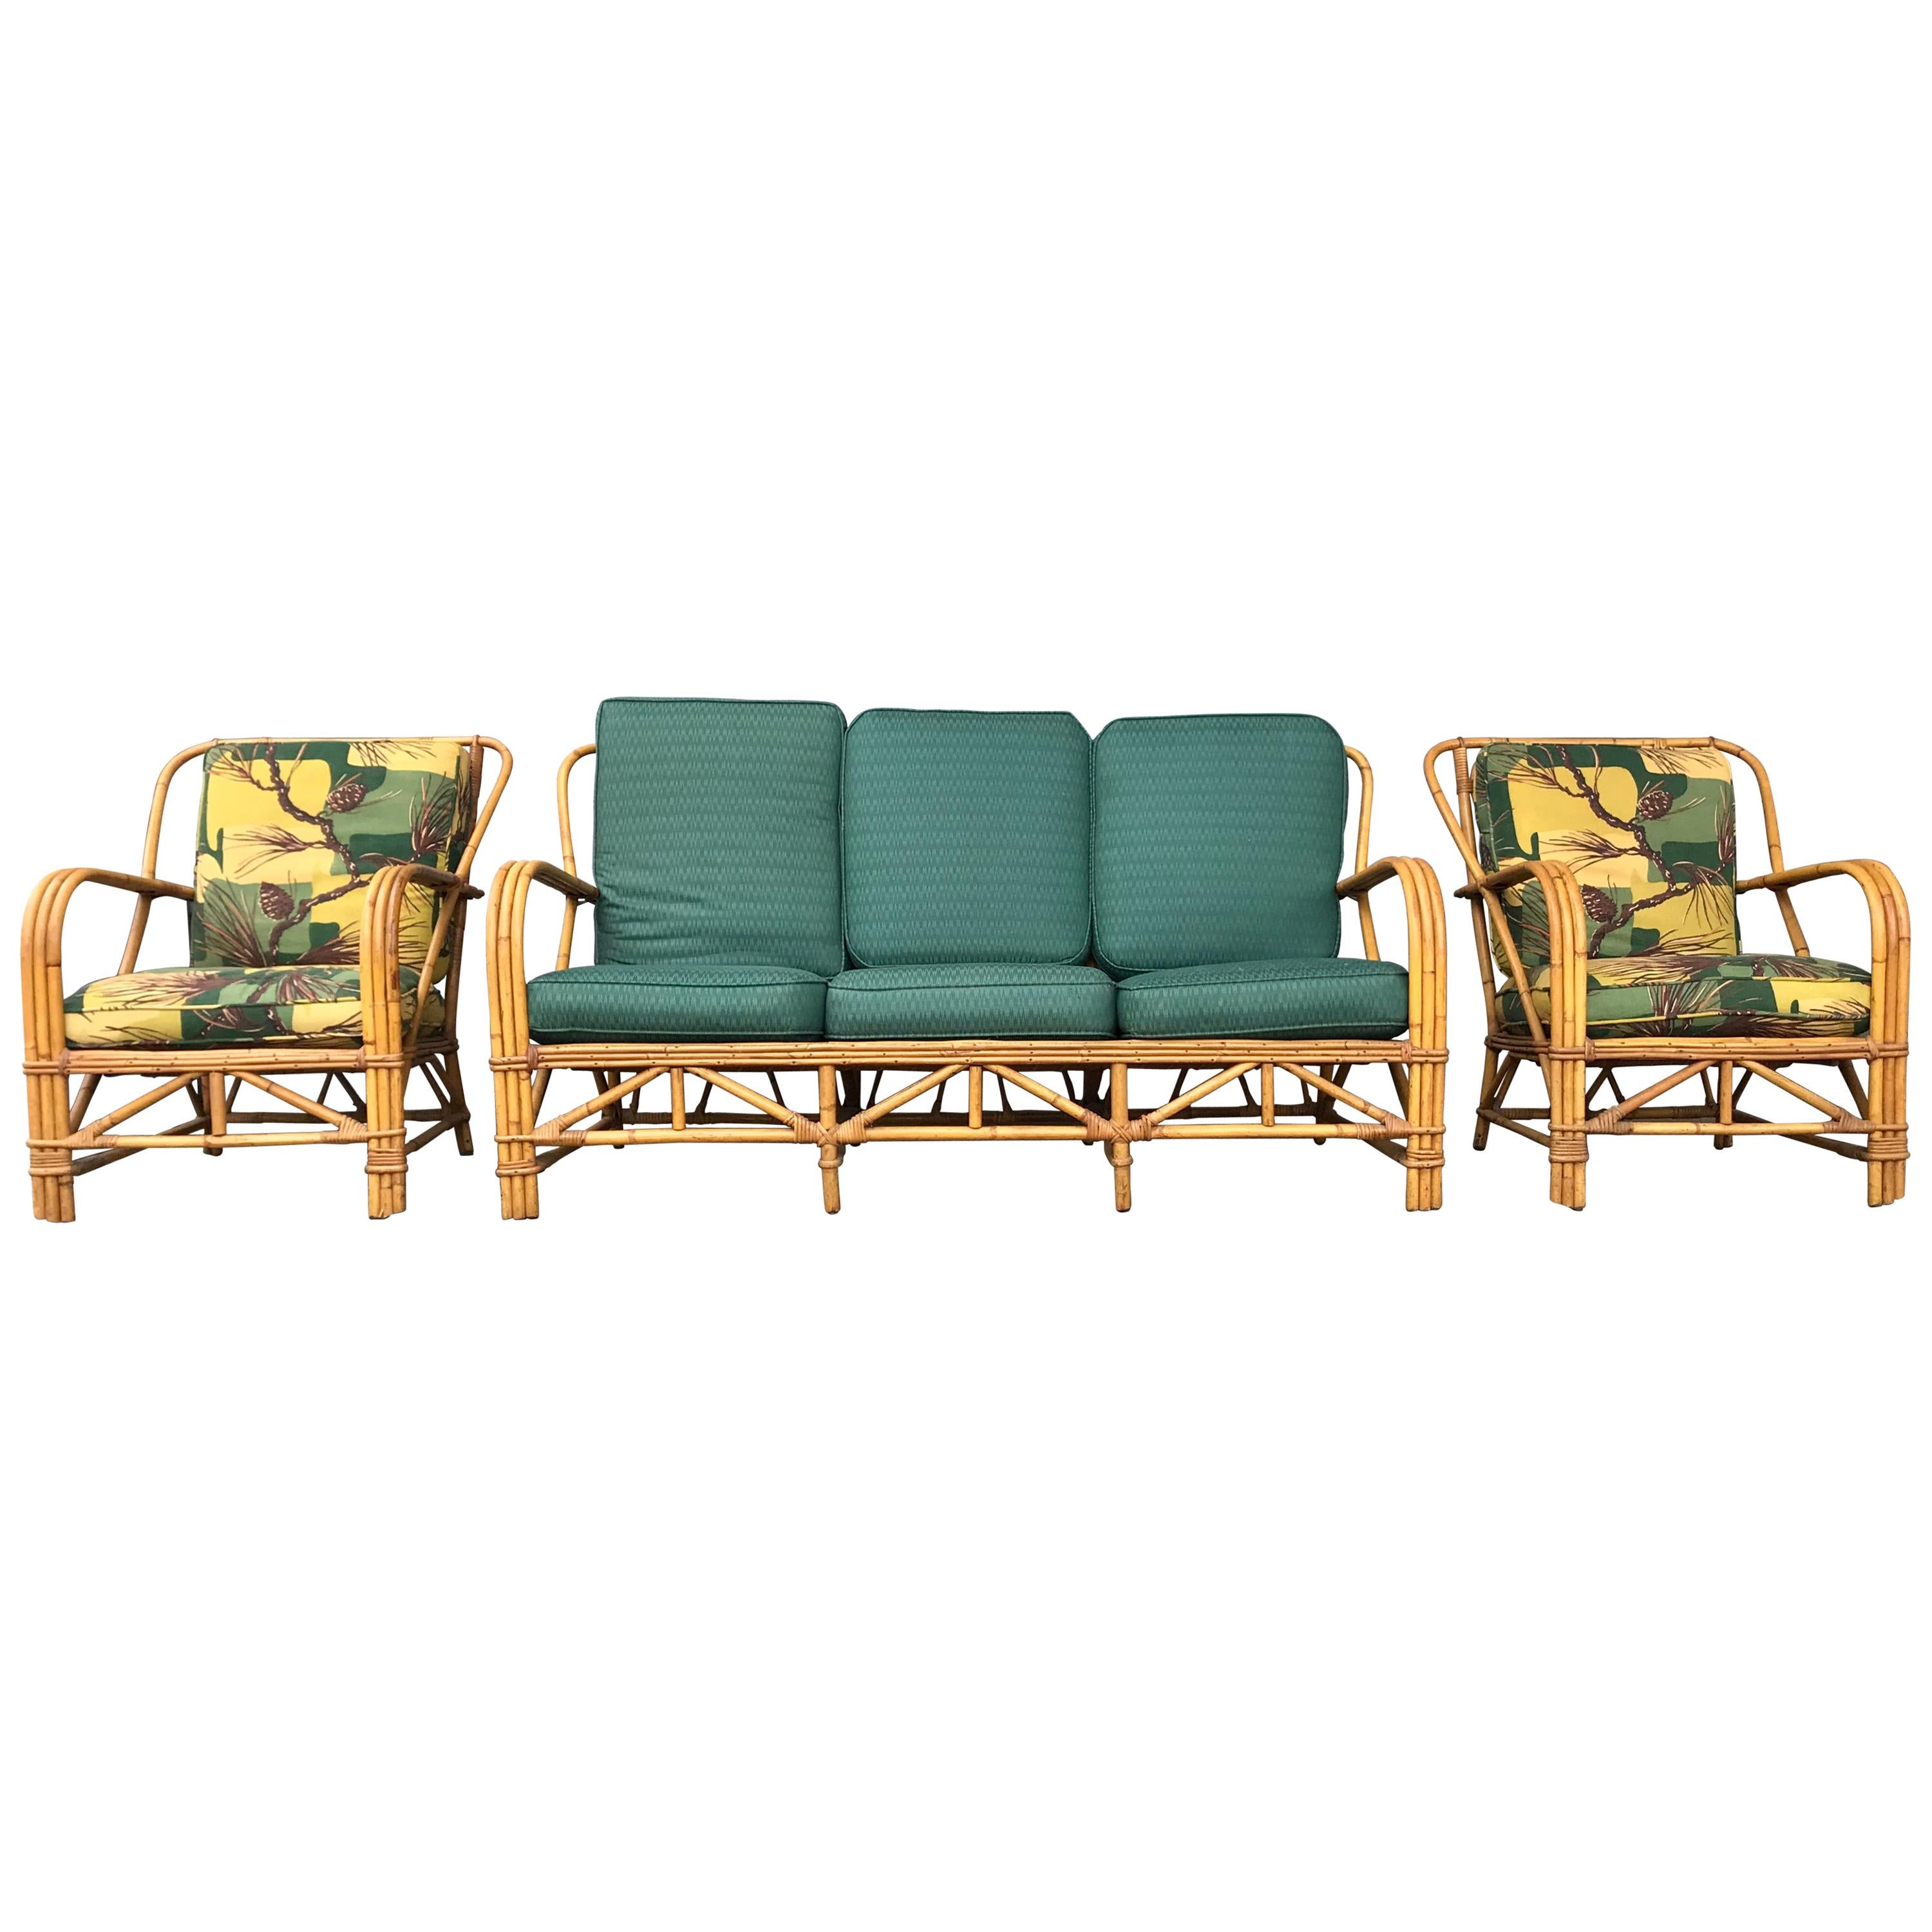 Three Piece Bamboo/ Rattan Living Room Suite Attribute to Ritts Tropitan